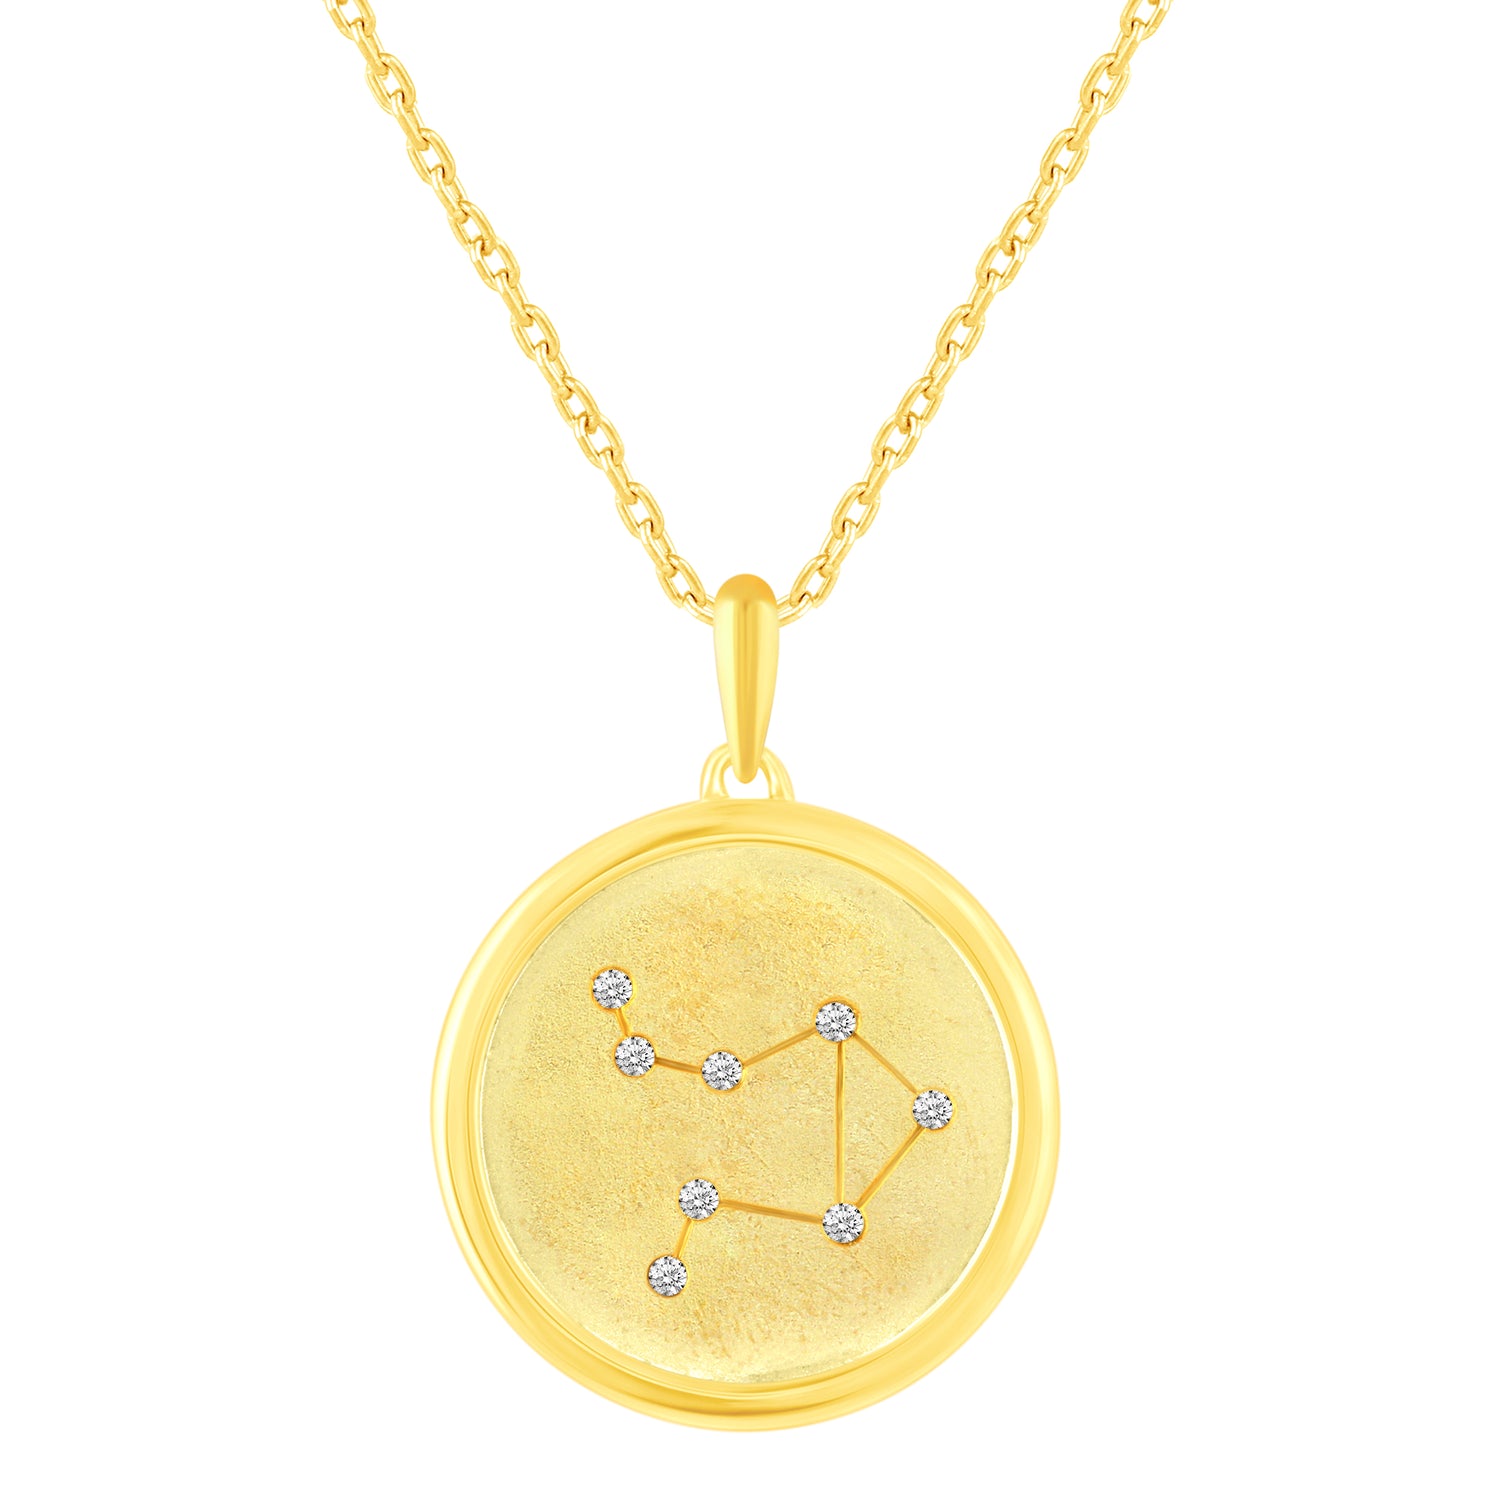 1/20 Cttw Diamond Zodiac Satin Finish Pendant Necklace set in 925 Sterling Silver 14K Yellow Gold Plating